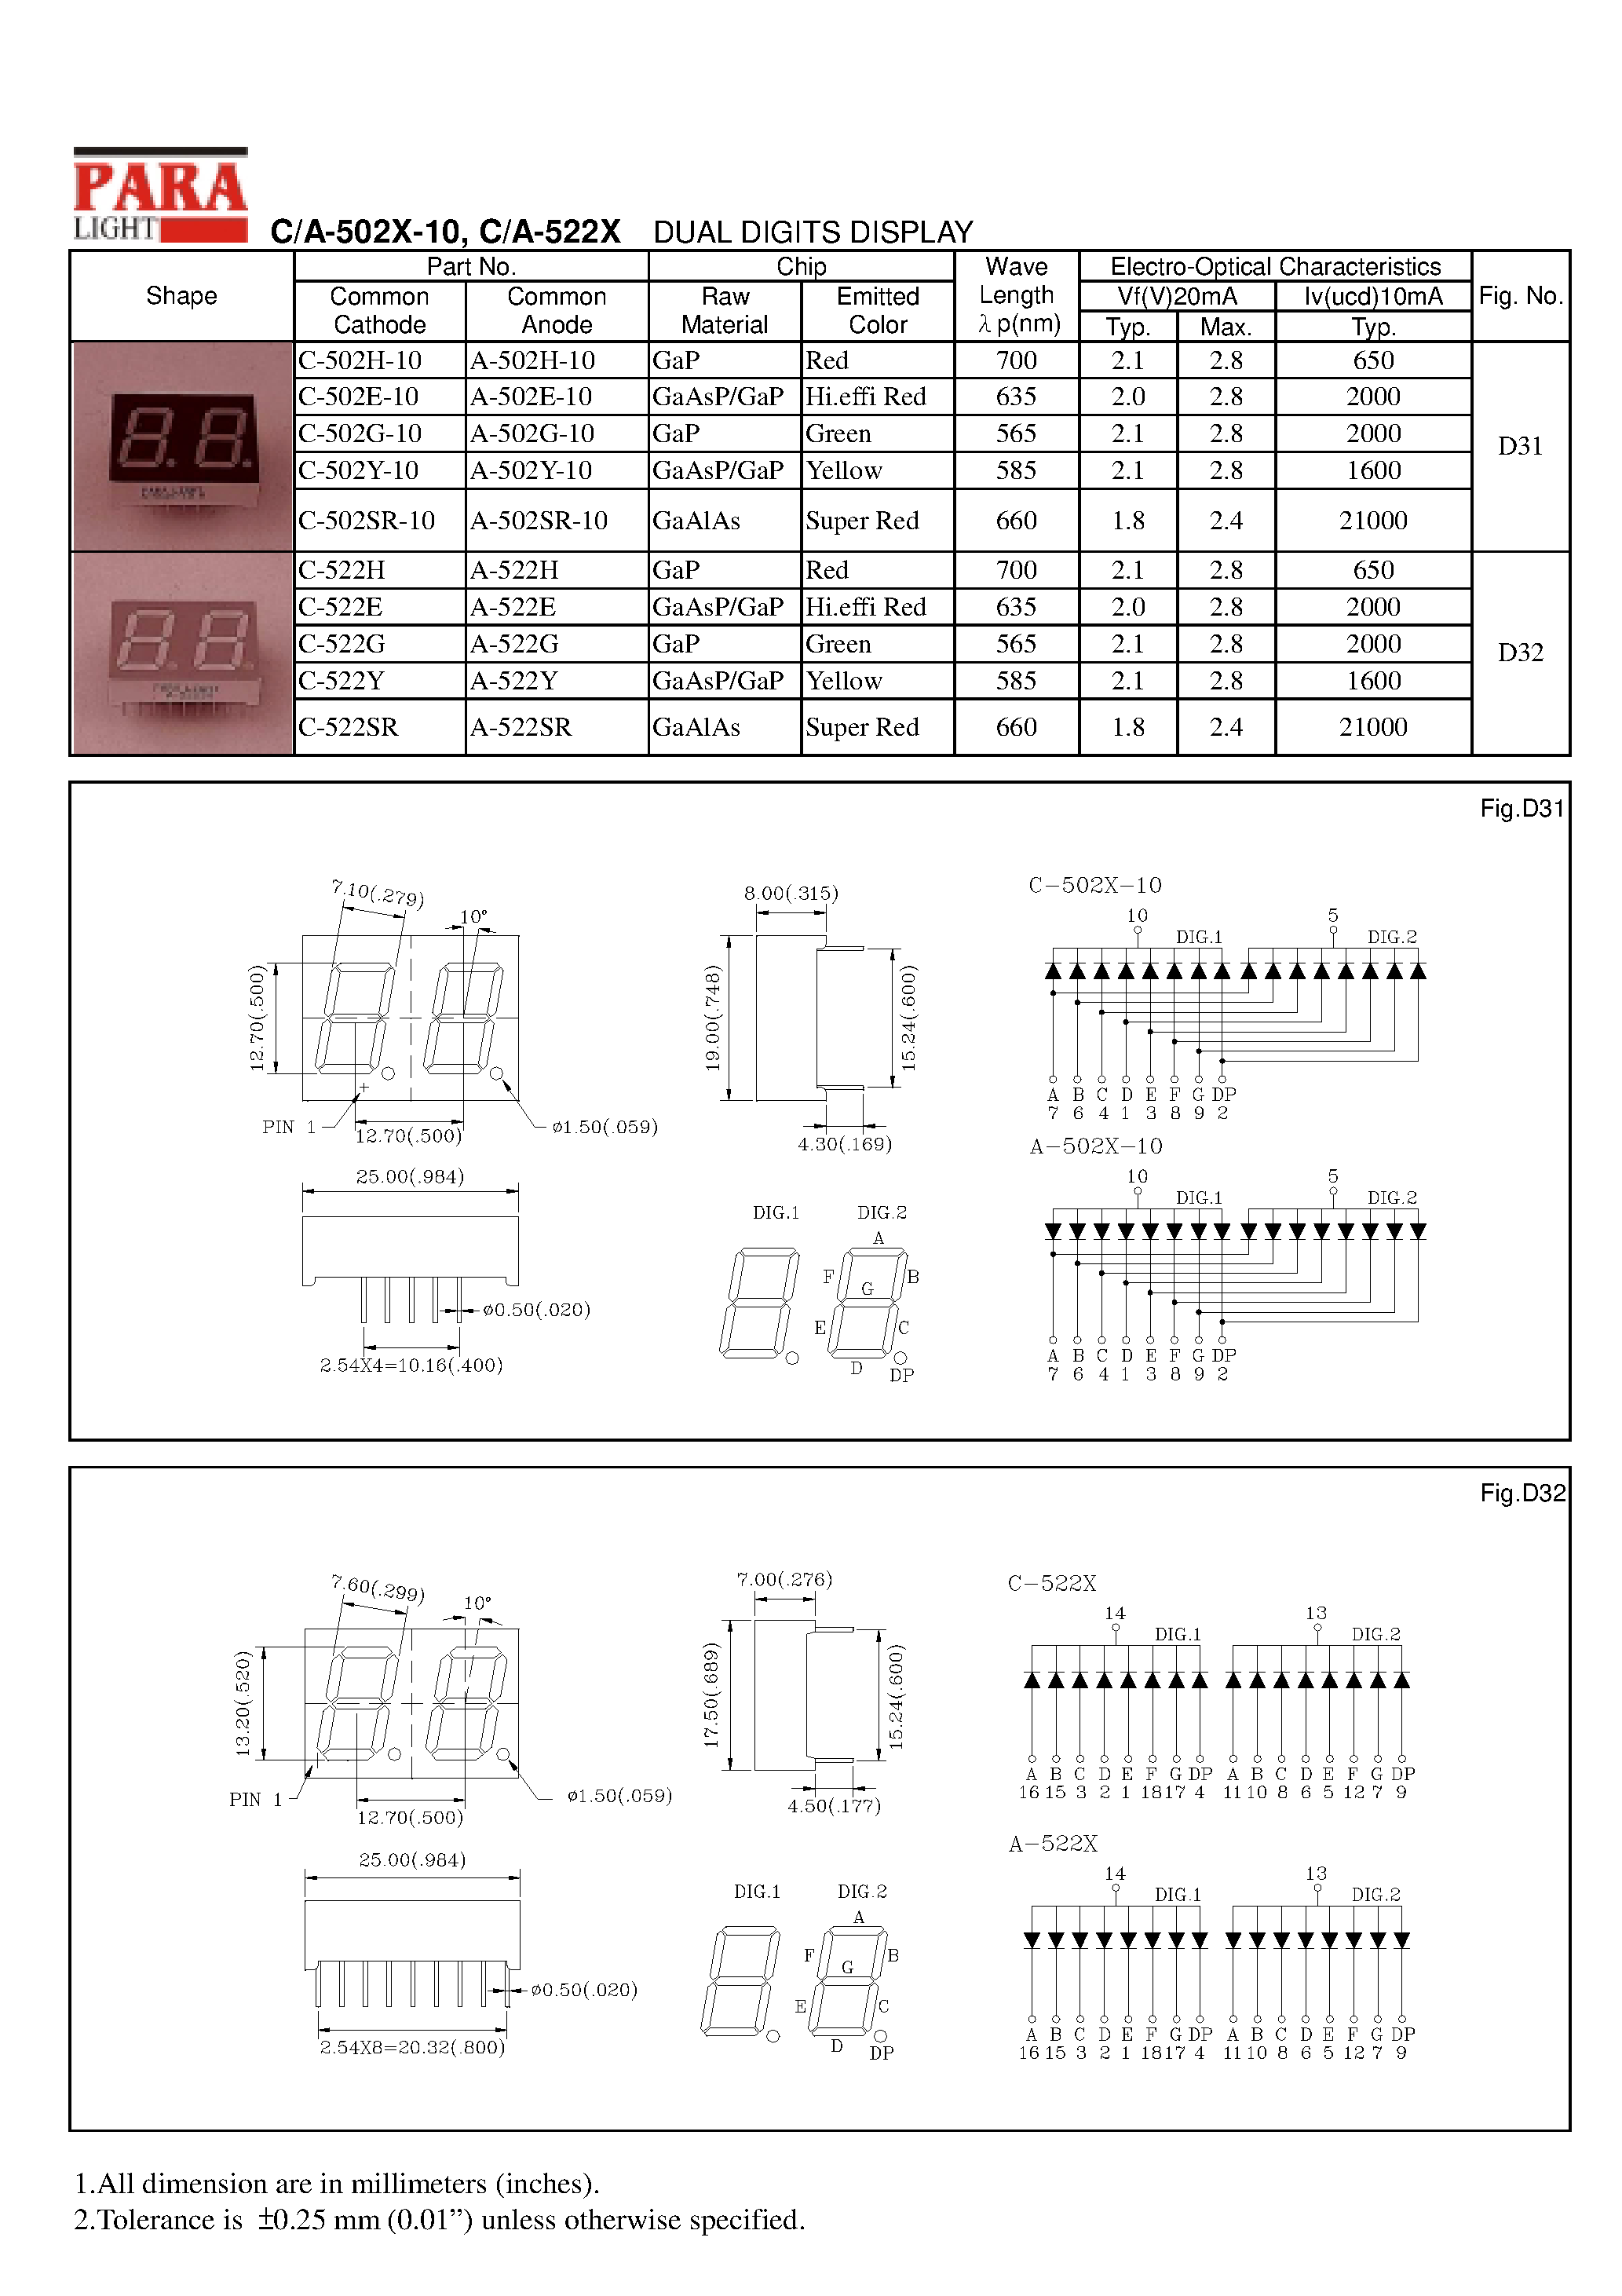 Datasheet A-502H-10 - DUAL DIGITS DISPLAY page 1